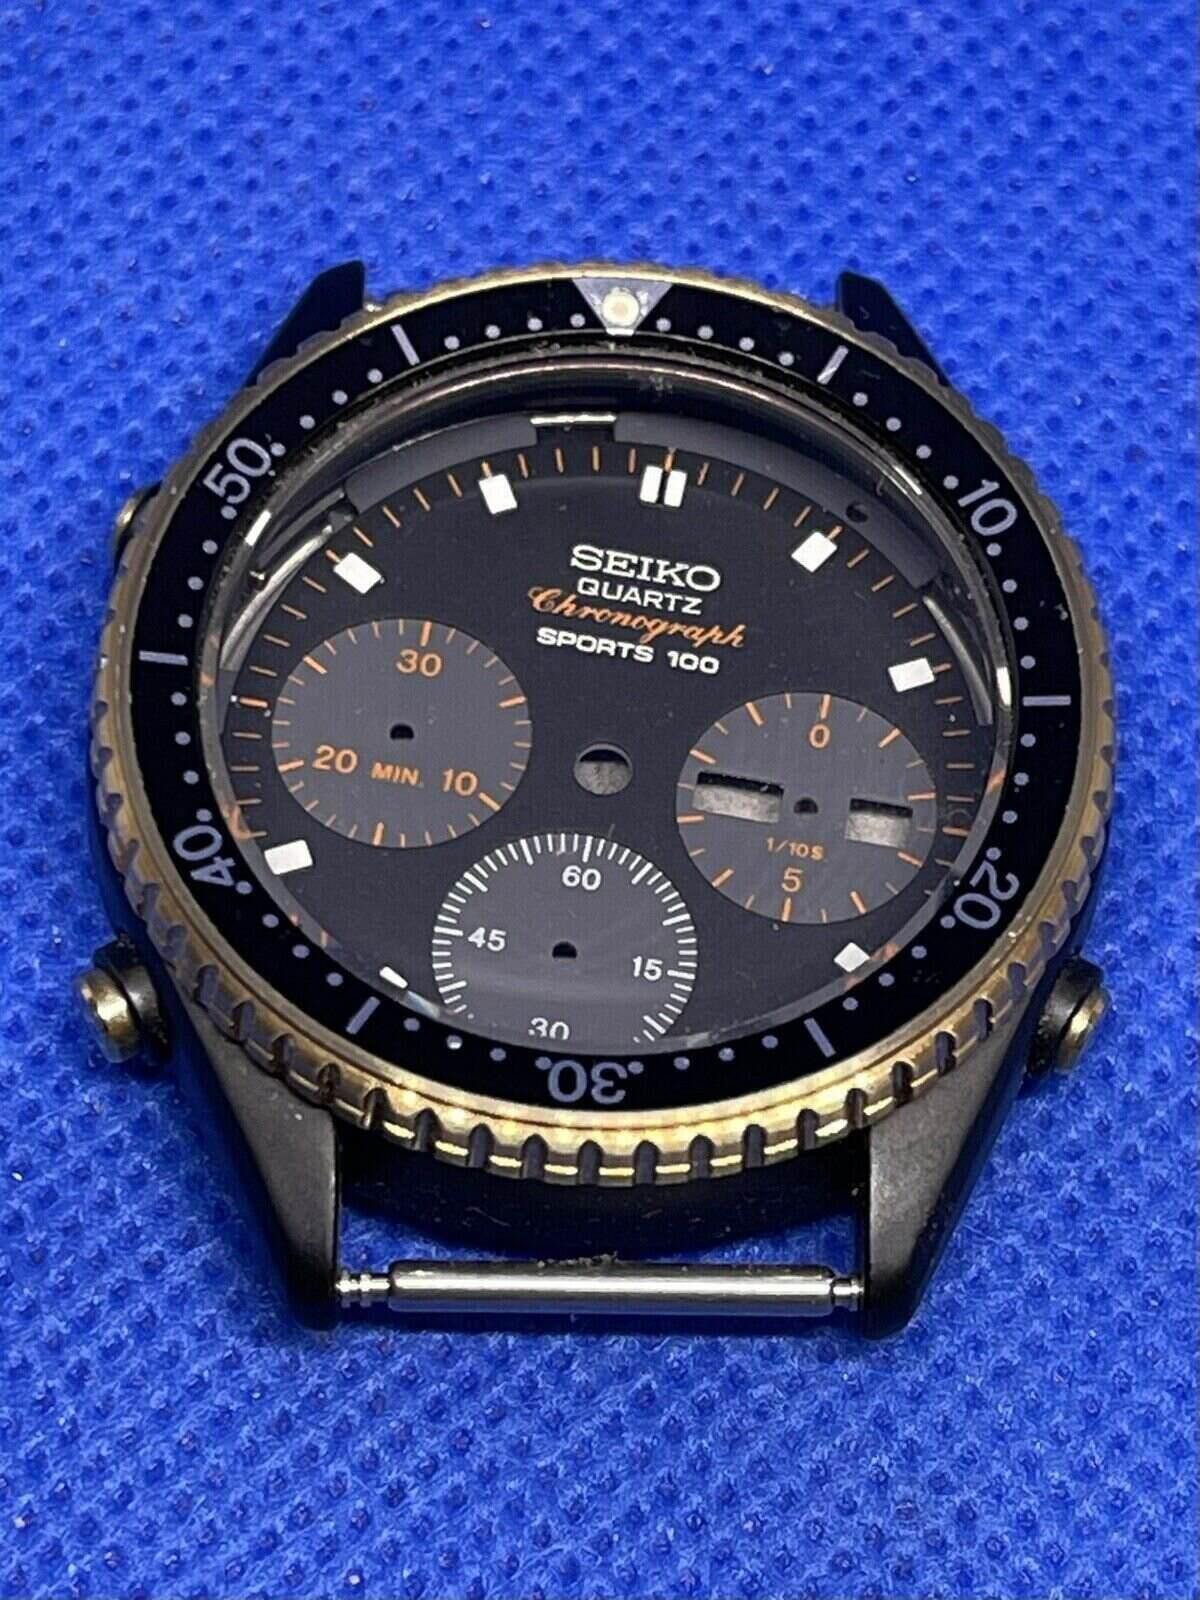 rsz_7a38-6010-divers-black-gold-emptywatchcase-707ldial-7a38-705a-ebay-july2021-1.jpg